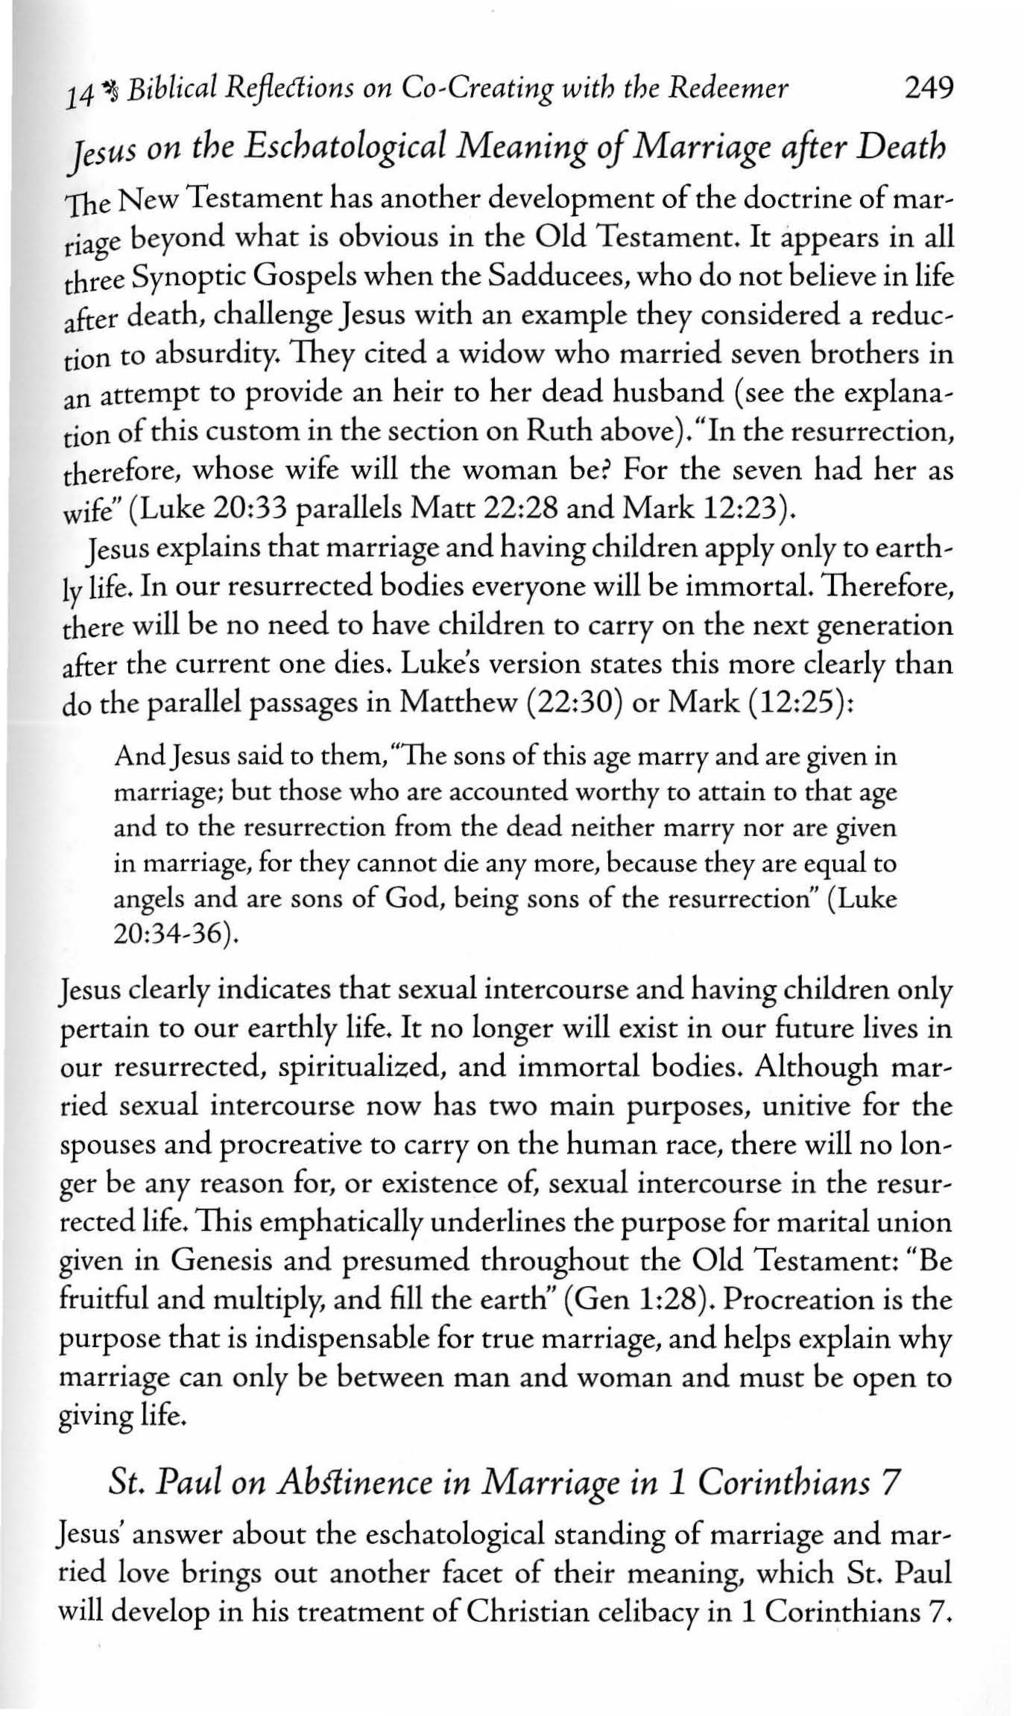 14 ~ Biblical Reflections on Co-Creating with the Redeemer 249 JesUs on the Eschatological Meaning of Marriage after Death 1he New Testament has another development of the doctrine of marriage beyond